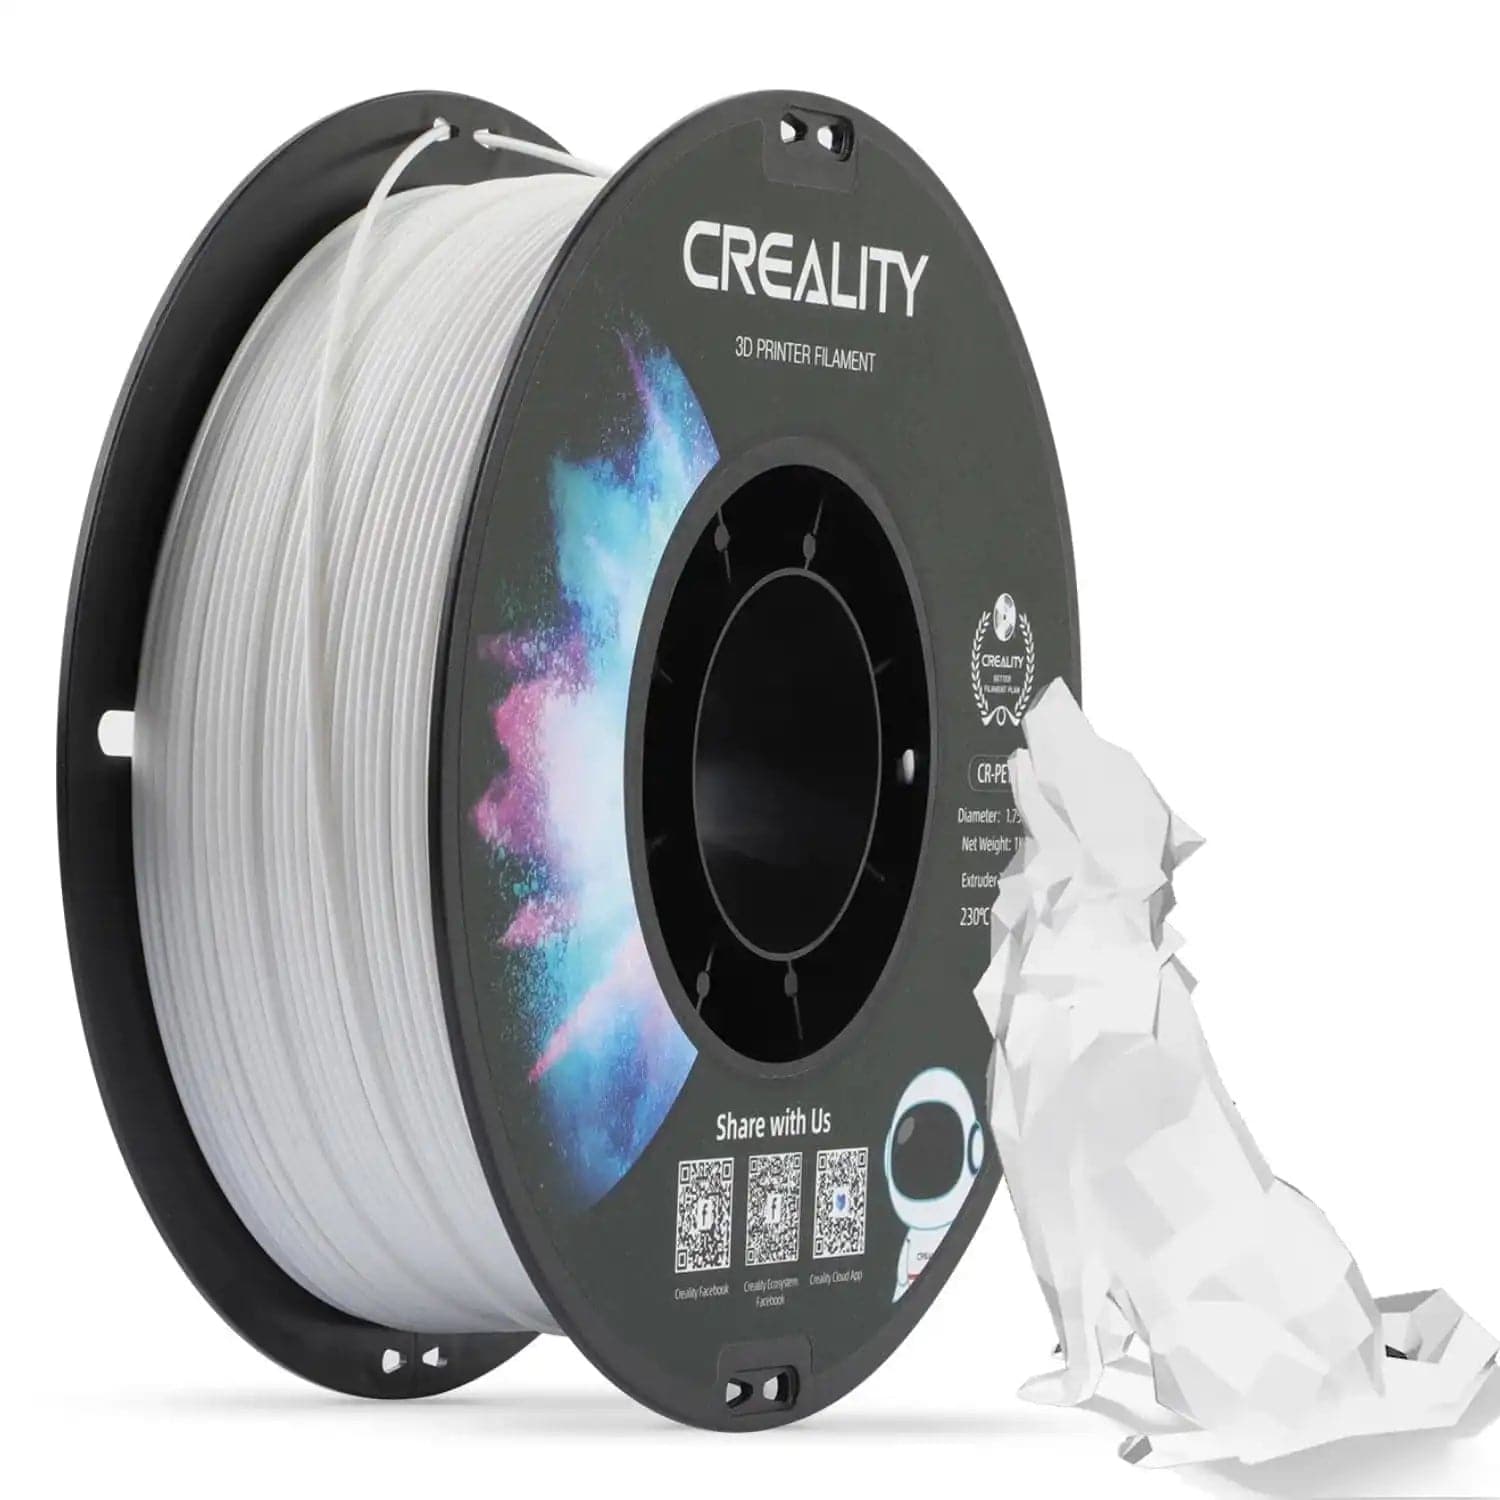 Creality 3D Printer Filament 1.75mm, Ender PLA Filament No-Tangling Smooth  Printing Without Clogging No Warping, Fit Most FDM 3D Printers, 1kg Spool,  Dimensional Accuracy +/- 0.02mm